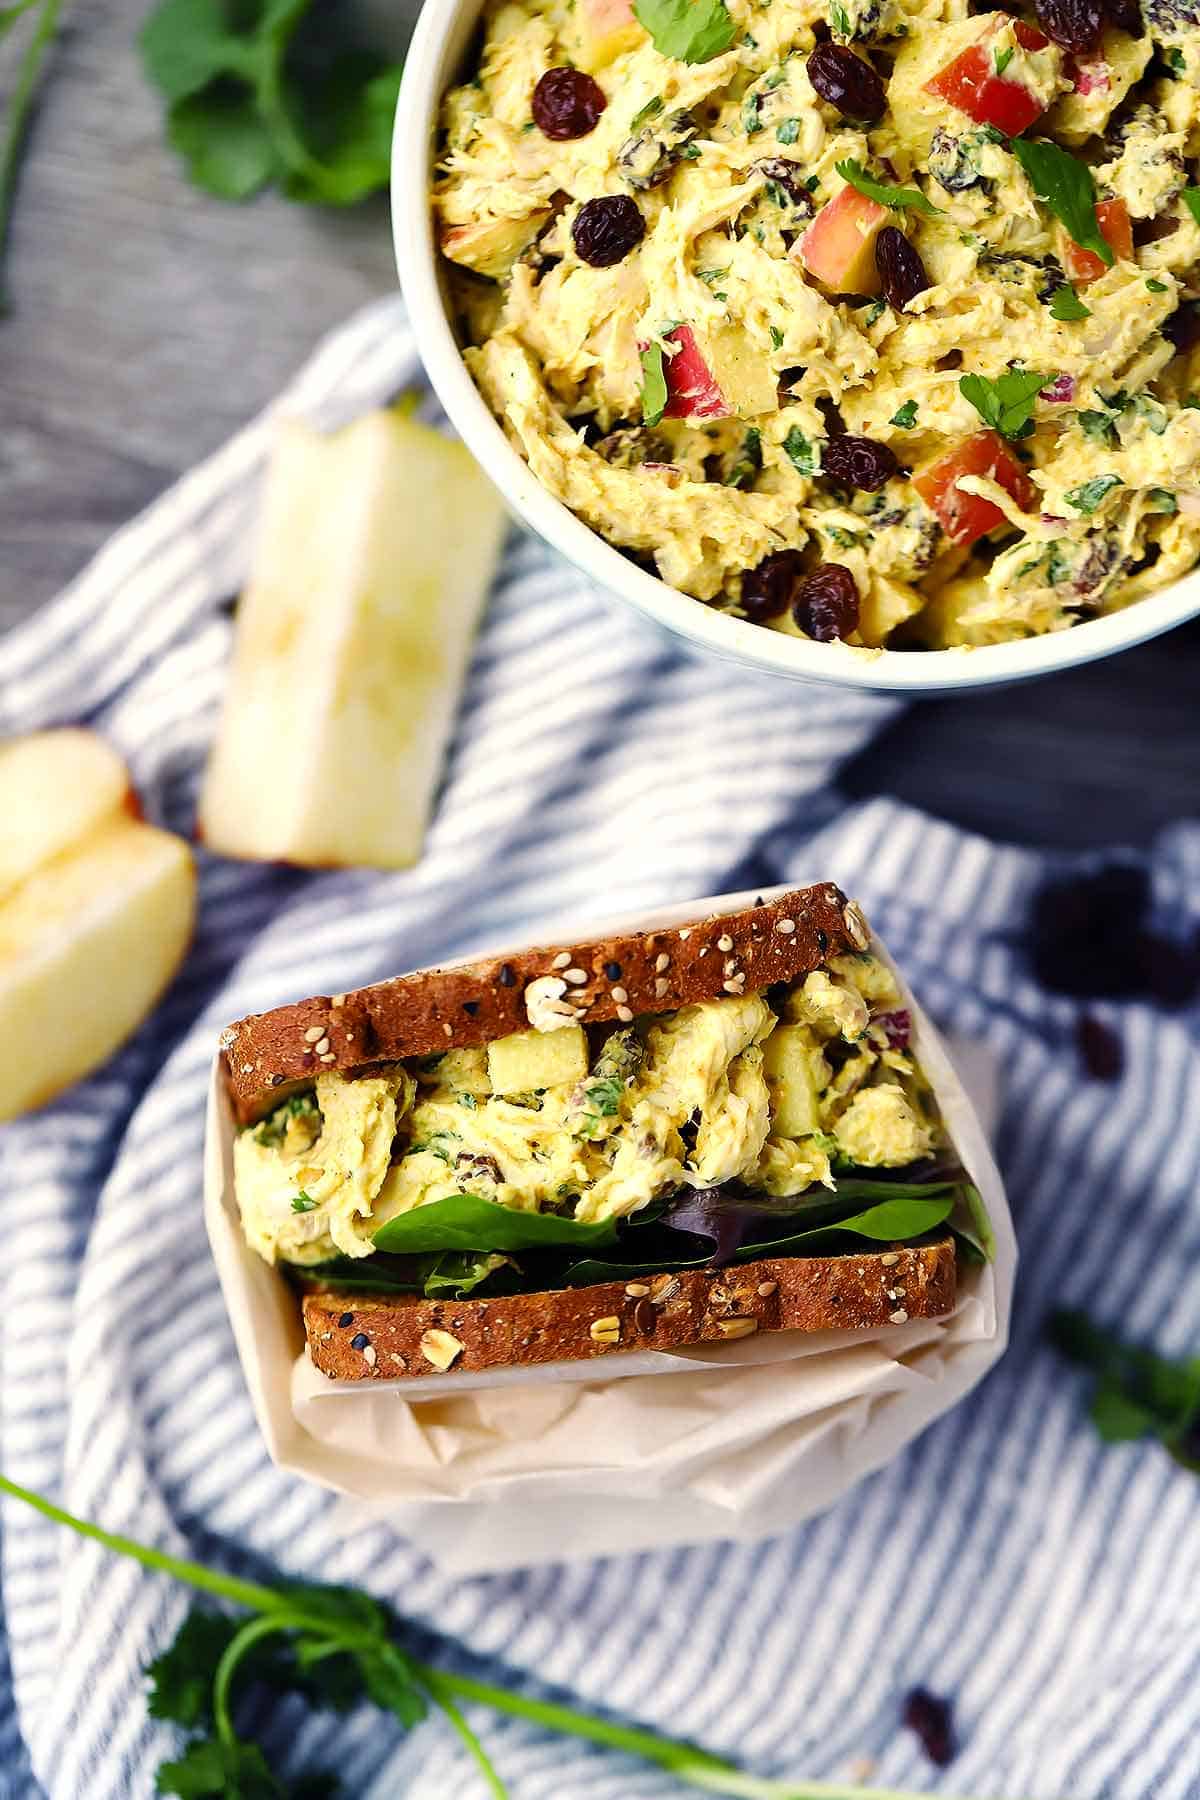 A curried chicken salad sandwich next to a bowl on a towel wrapped in parchment paper.